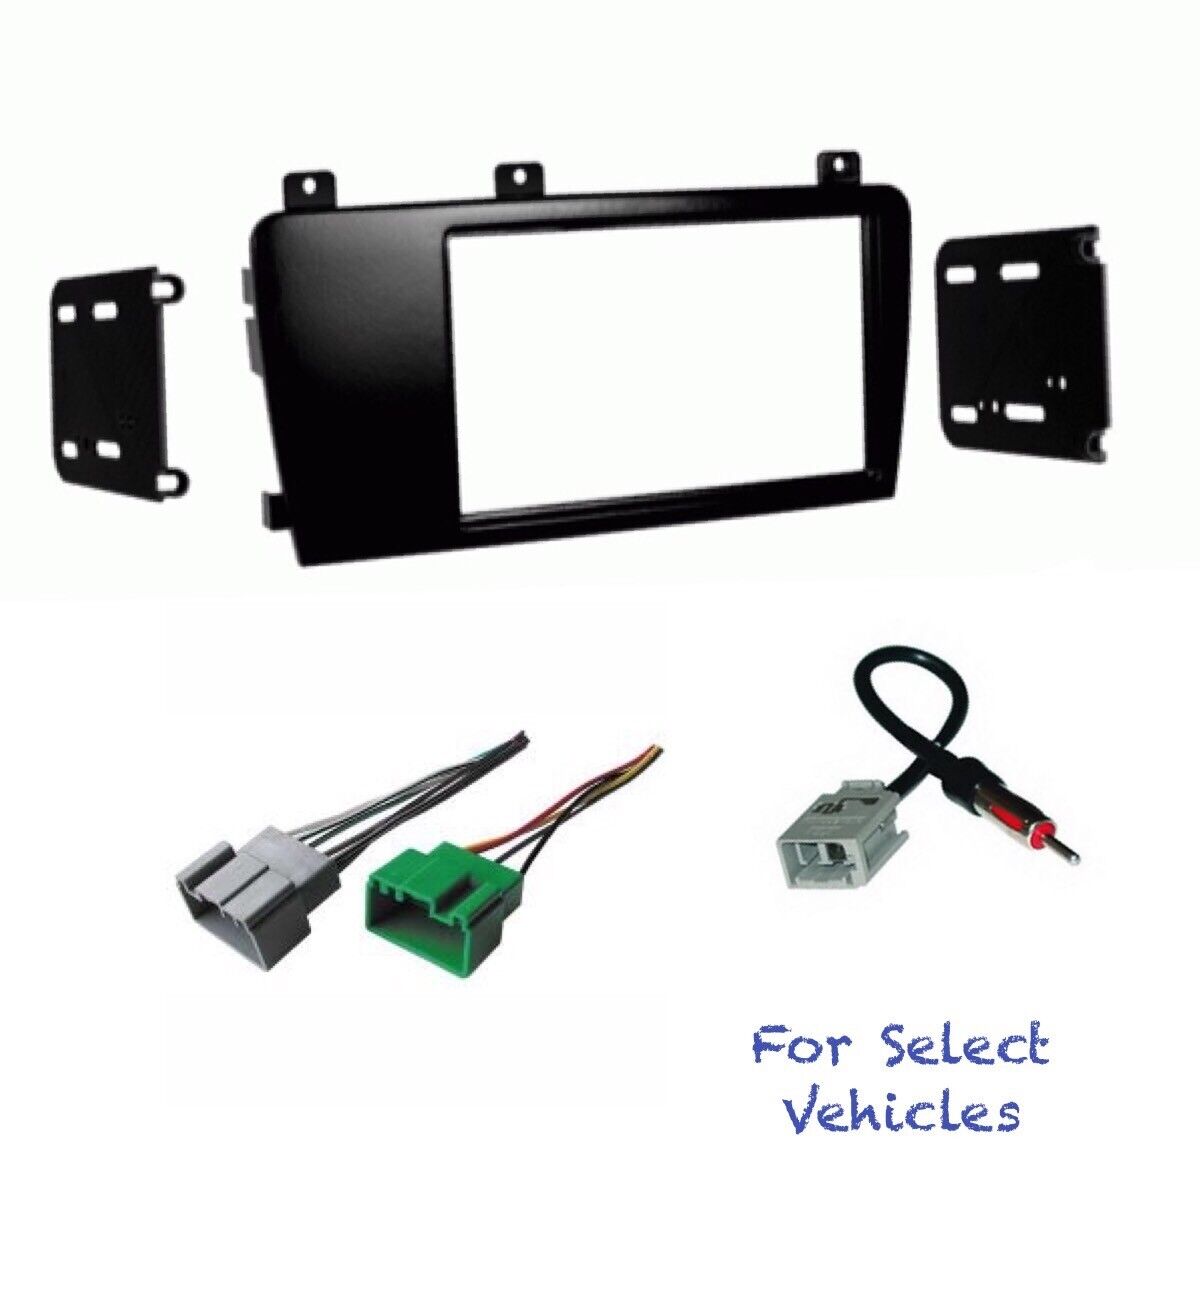 Double Din Car Stereo Radio Dash Kit Combo for some S60 V70 XC70 Volvo Vehicles